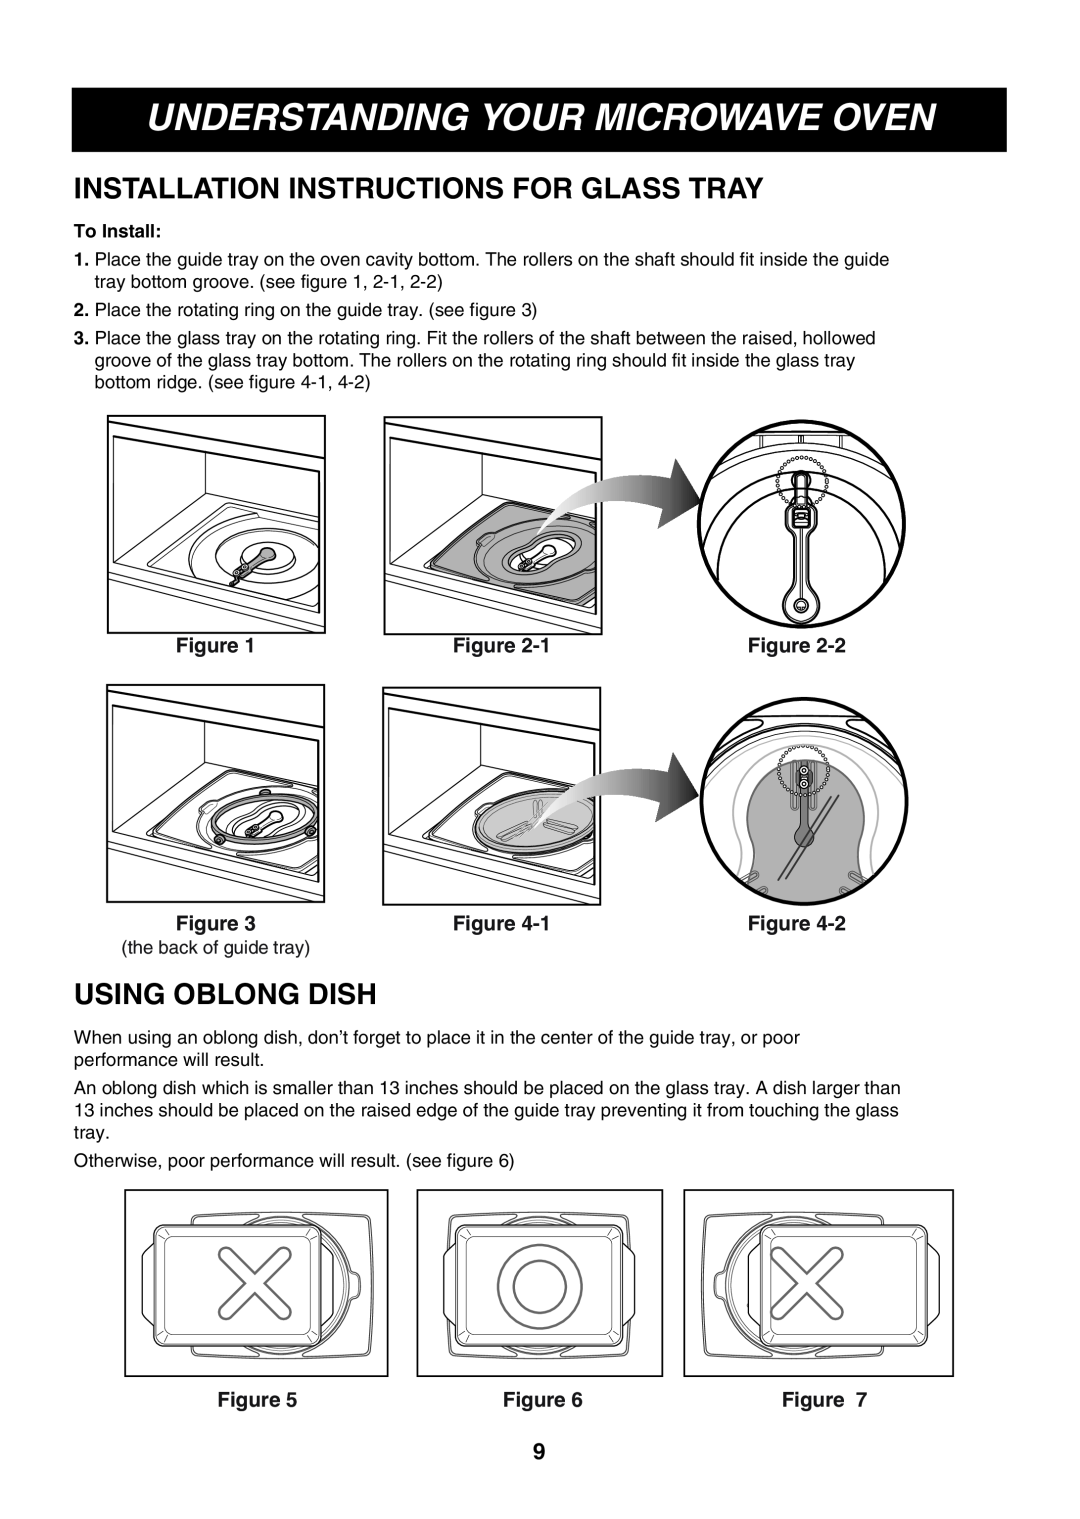 Minolta LMVM2085SB Installation Instructions For Glass Tray, Using Oblong Dish, Understanding Your Microwave Oven 